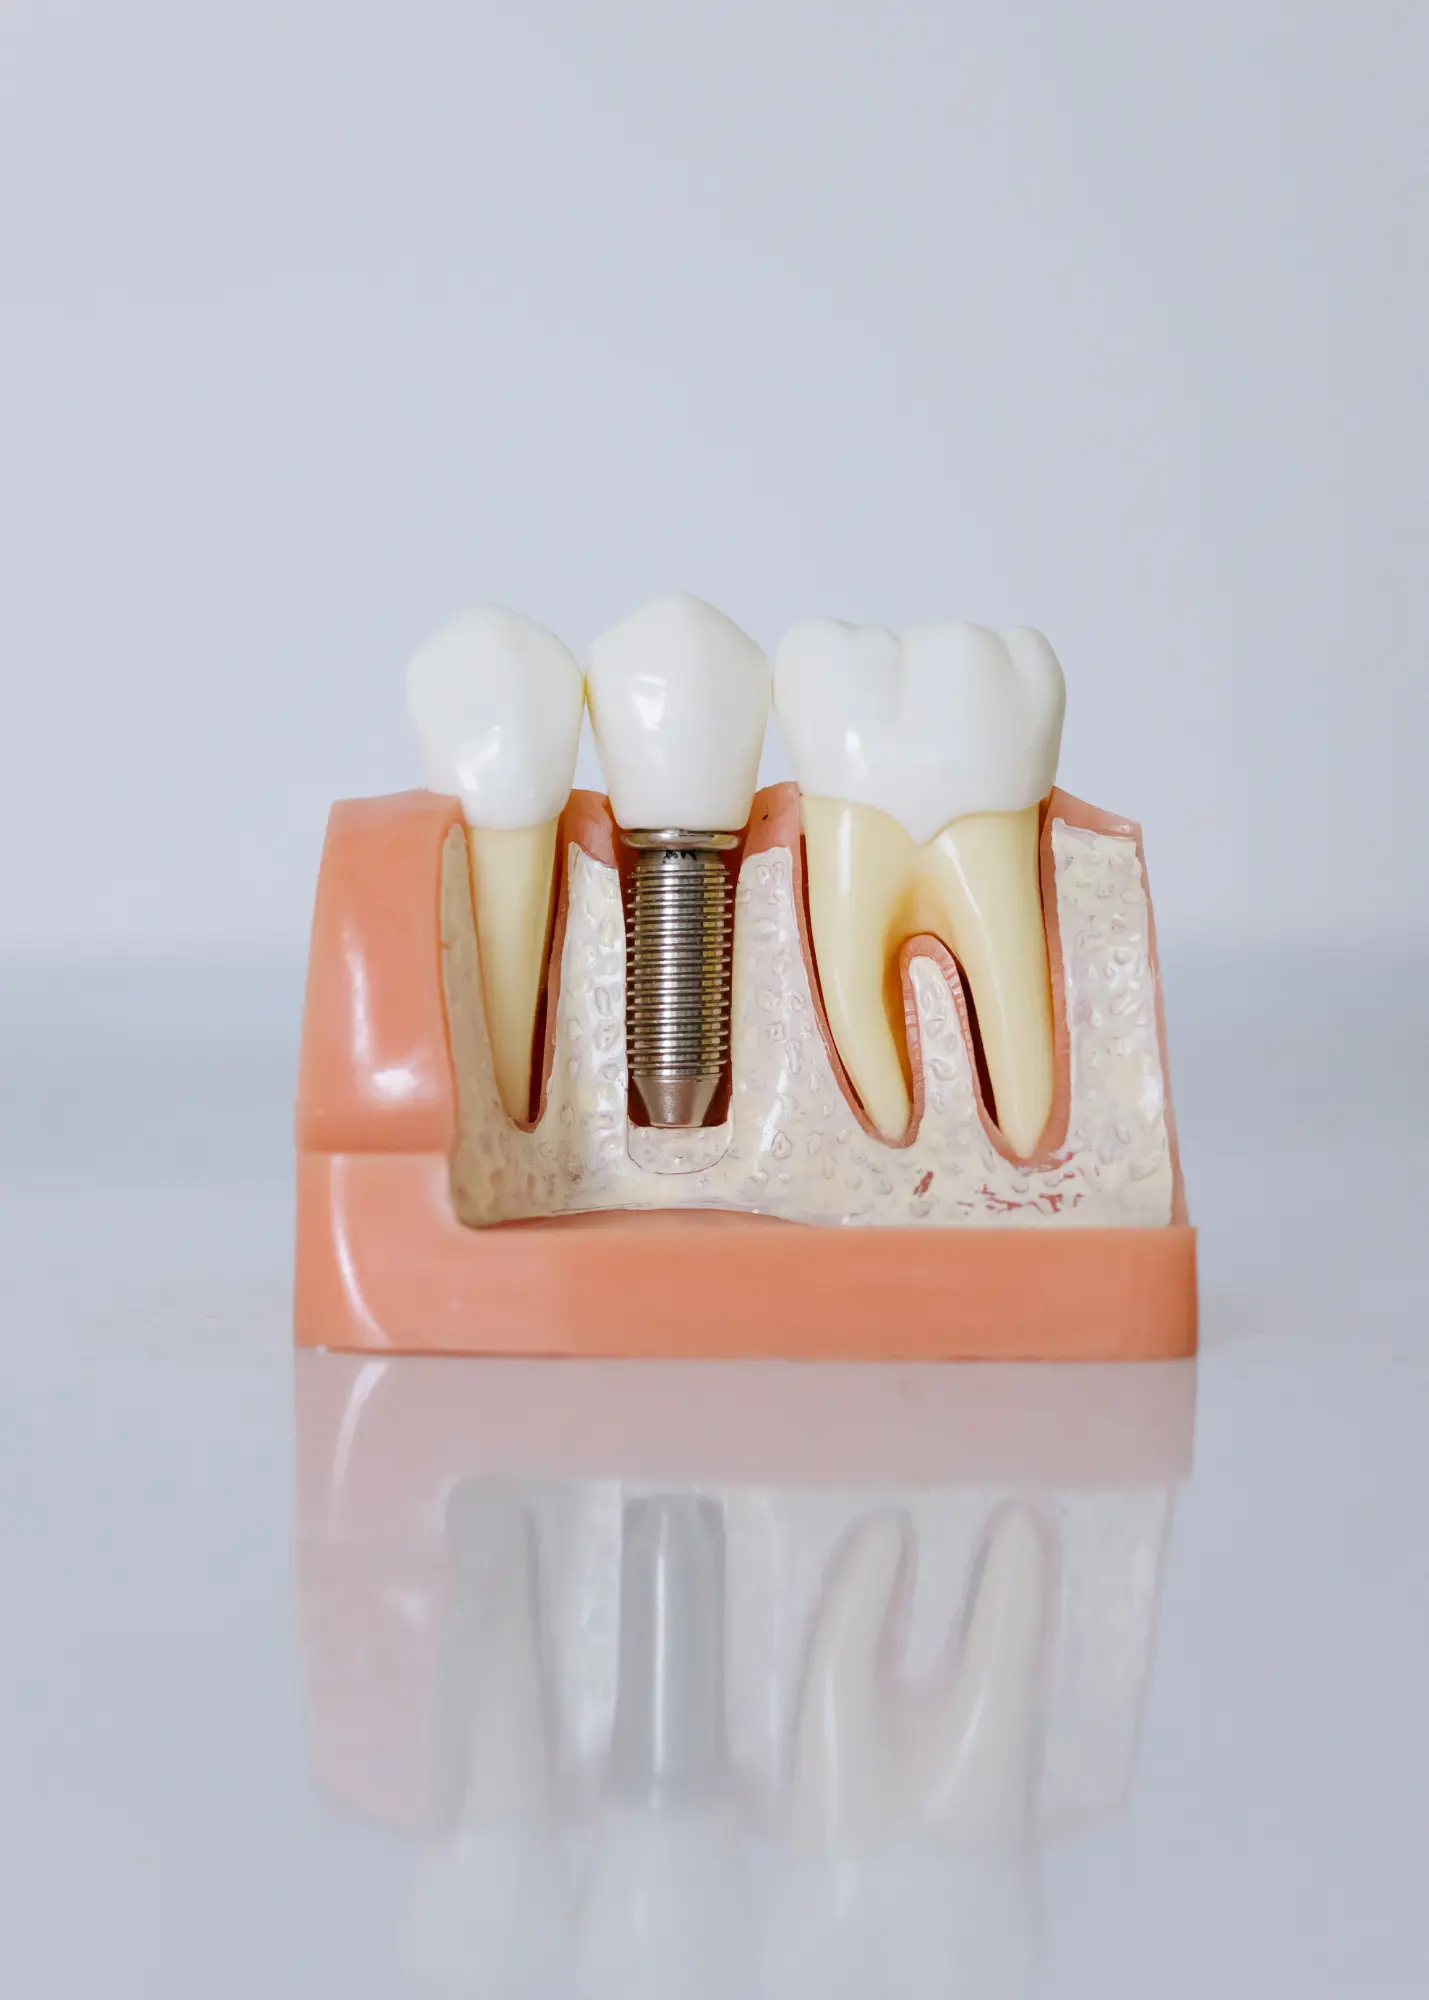 Garden Valley Family & Cosmetic Dentistry's Dental Implant service